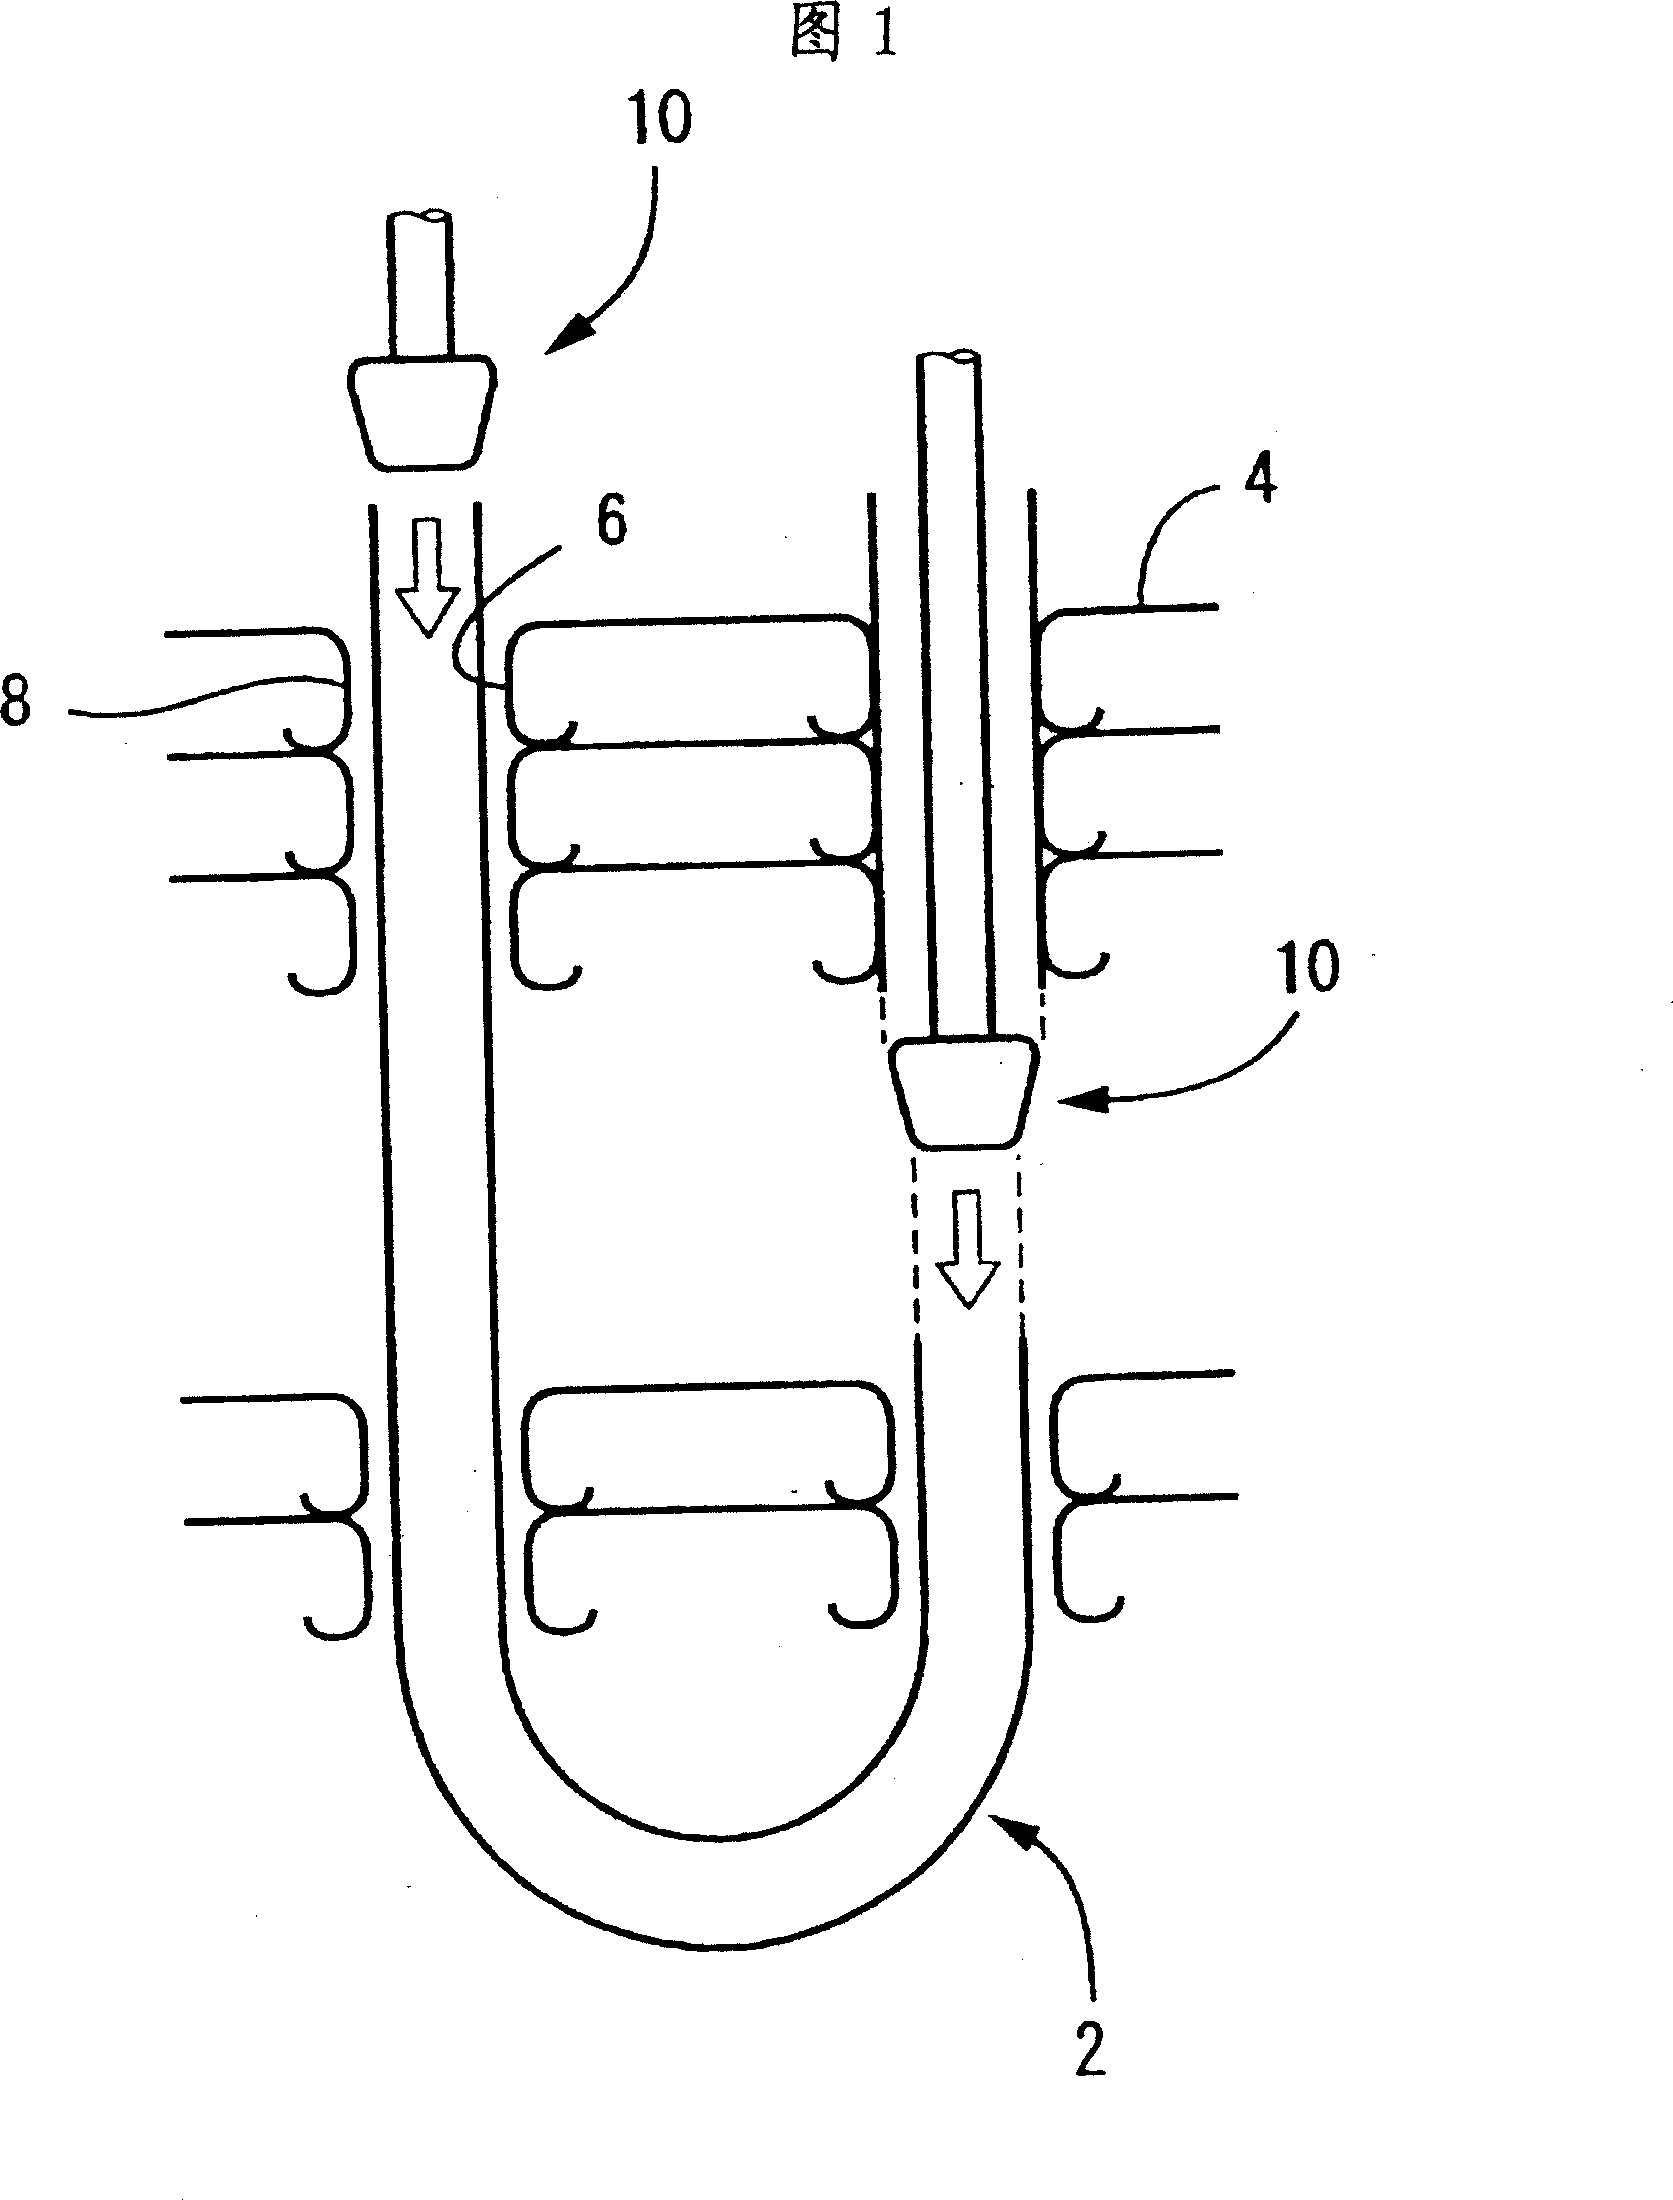 Heat-transfer tube with groove on inwall and method for manufacturing heat exchanger using the heat-transfer tube